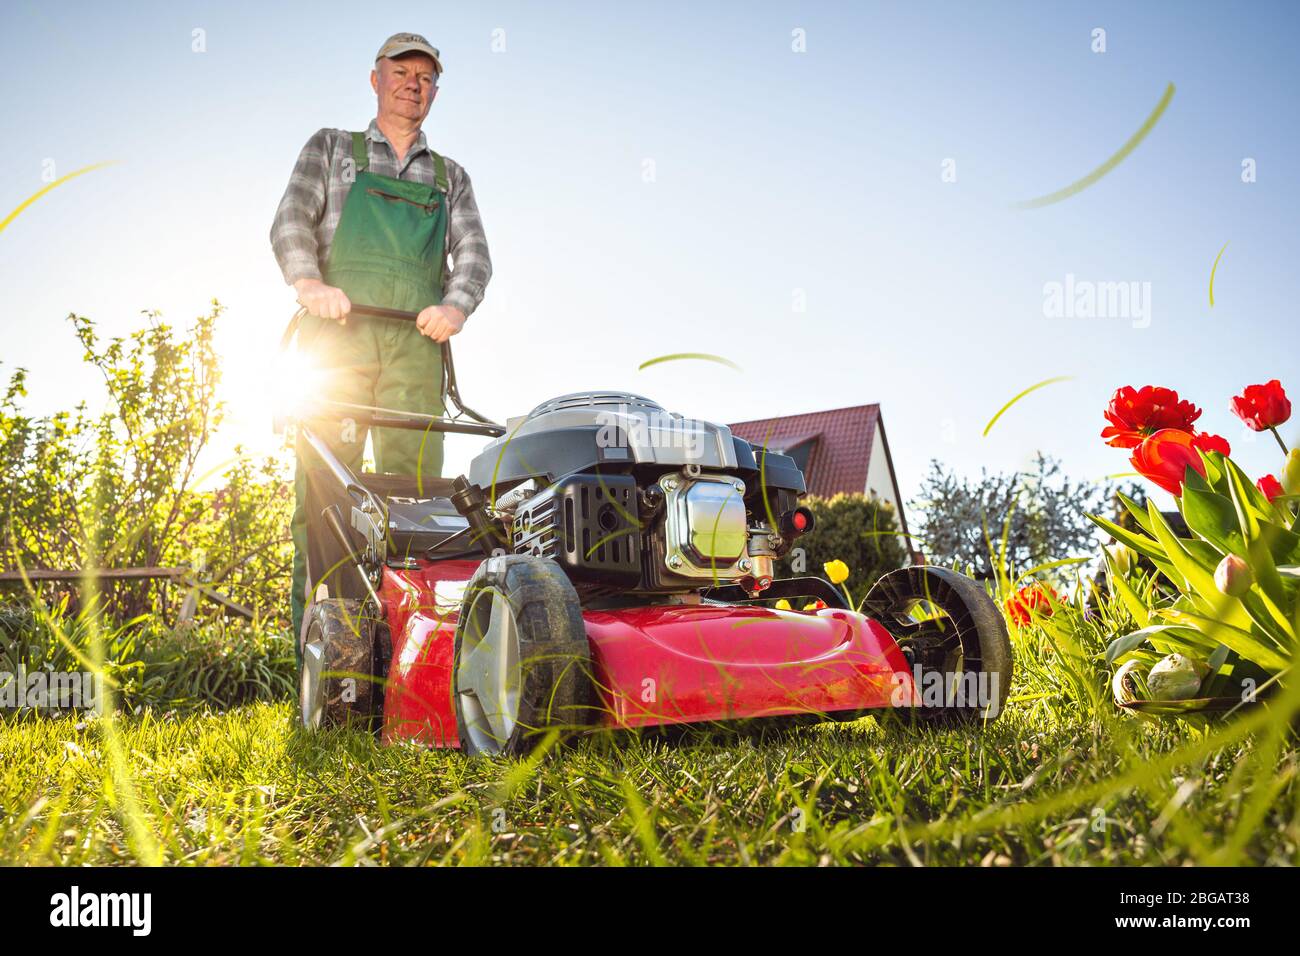 Man with a lawn mower working in his sunny garden Stock Photo